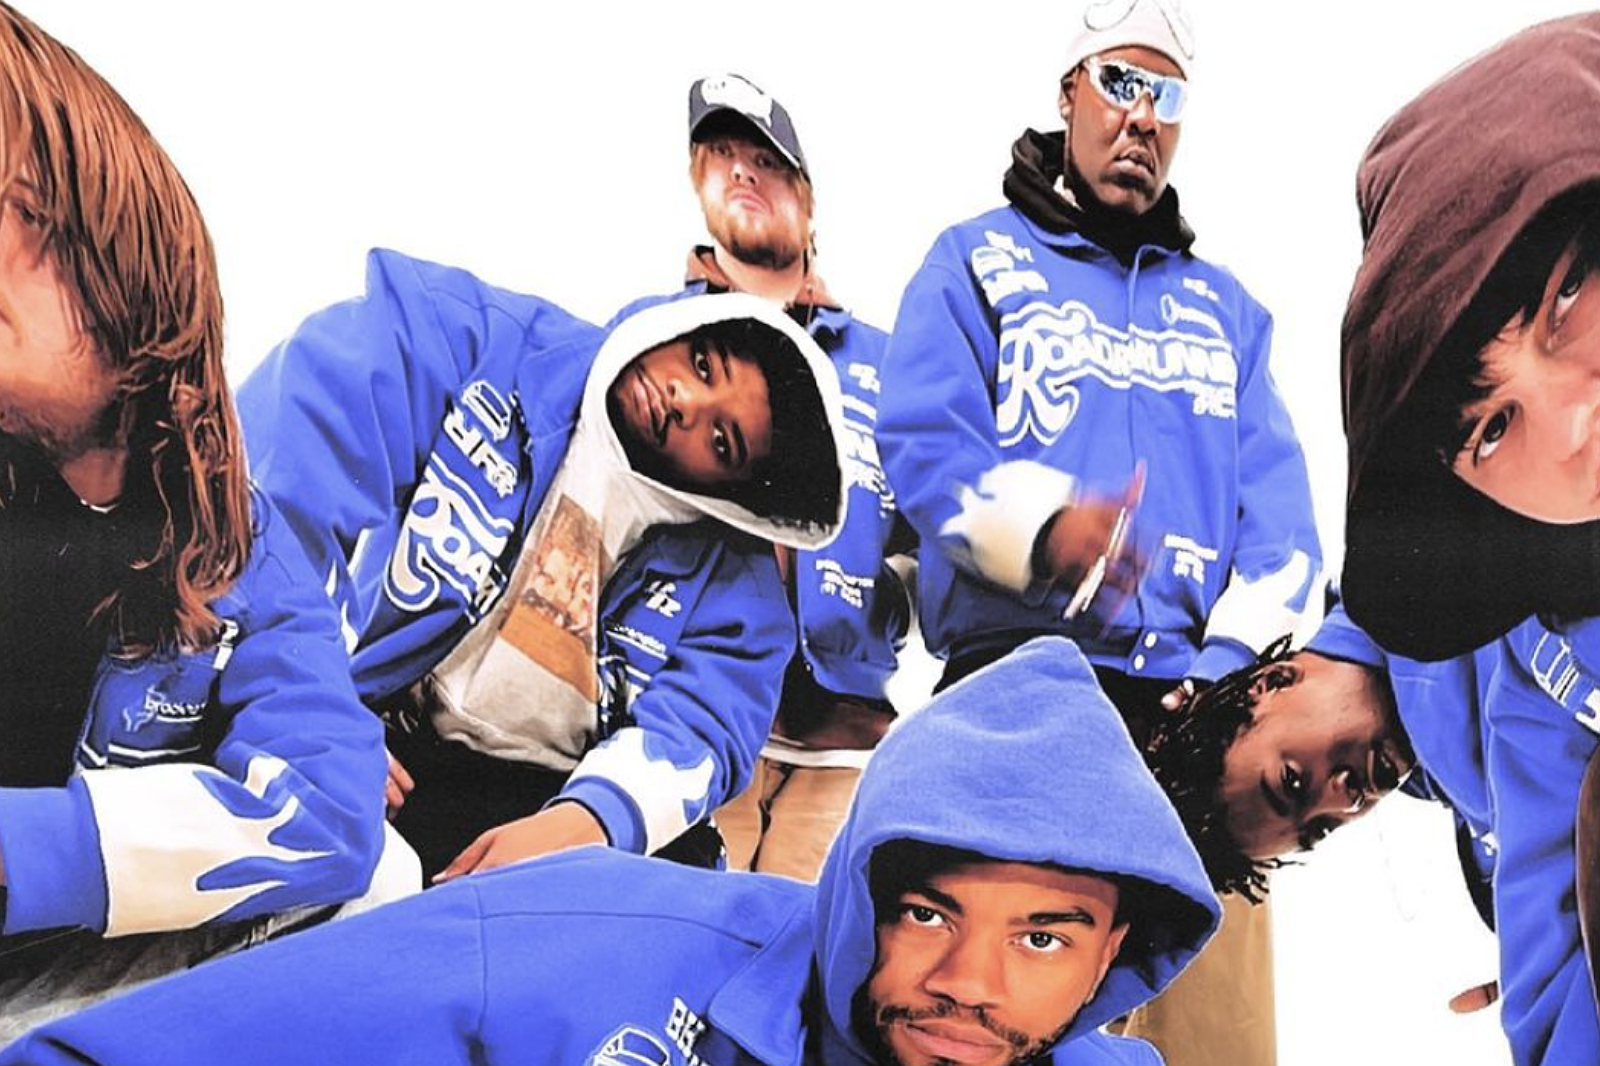 Best Boyband Since One Direction: A comprehensive guide to Brockhampton